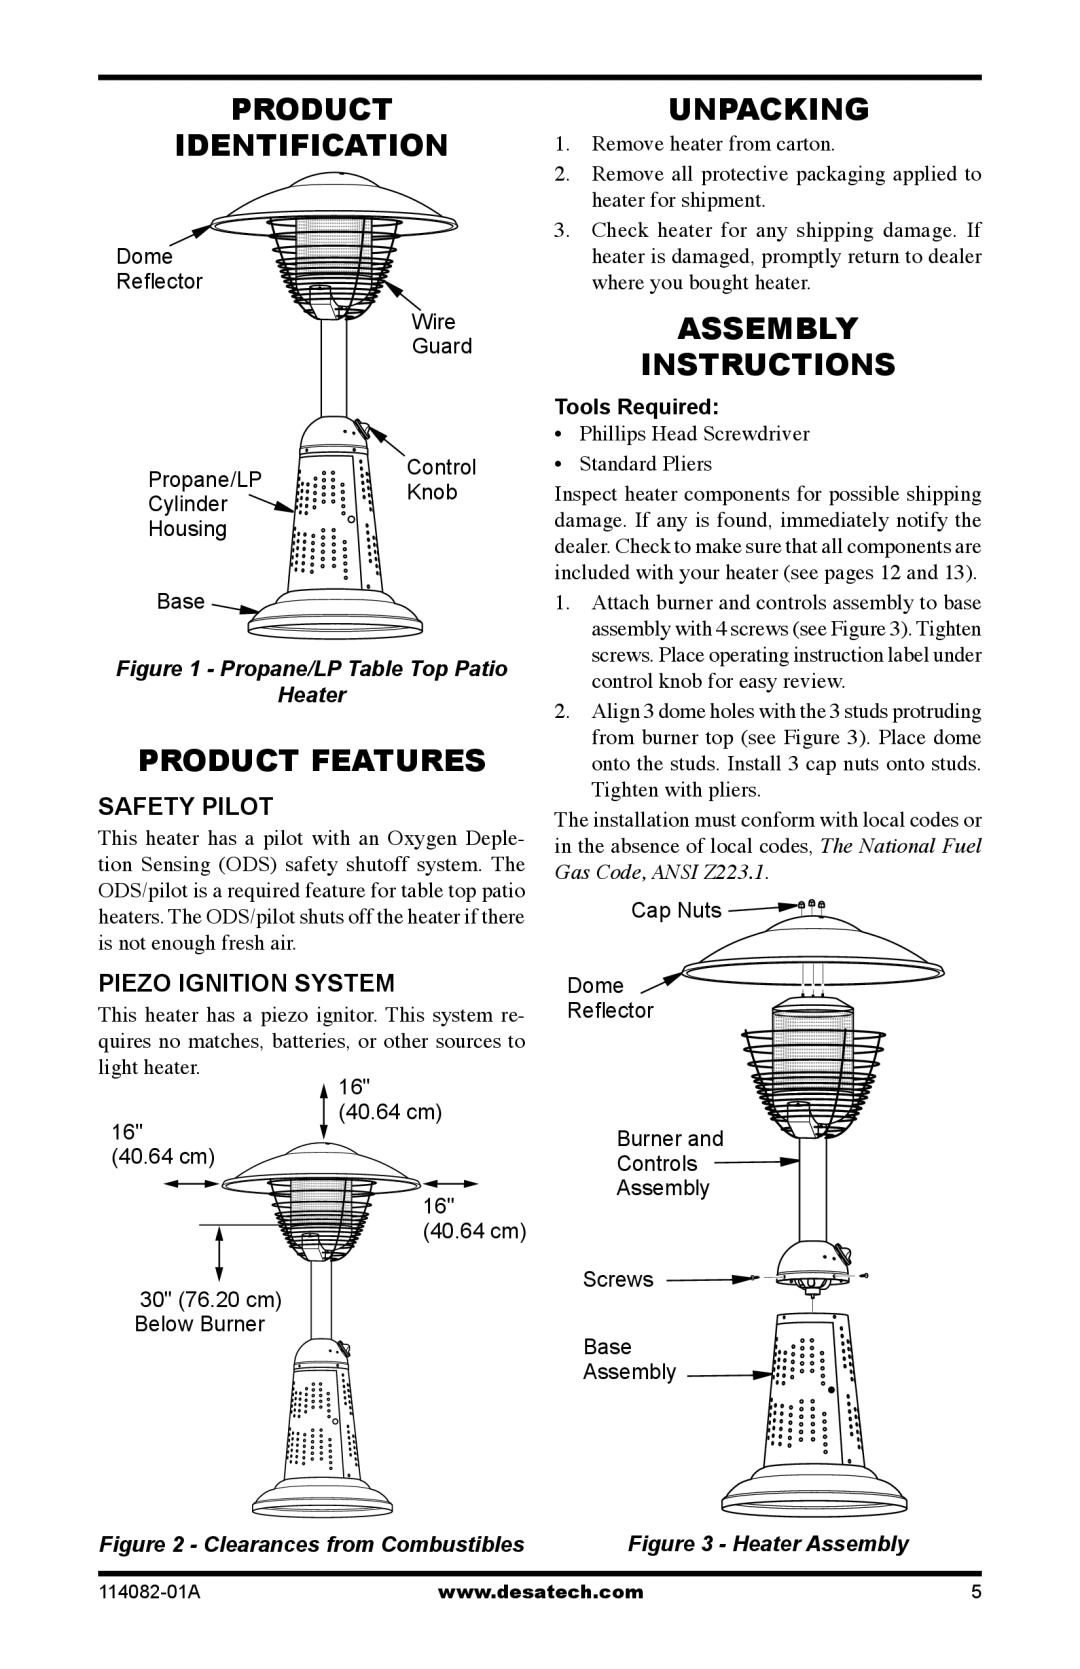 Desa SPC-21PHTSA Product Identification, Product Features, Unpacking, Assembly Instructions, Safety Pilot, Tools Required 